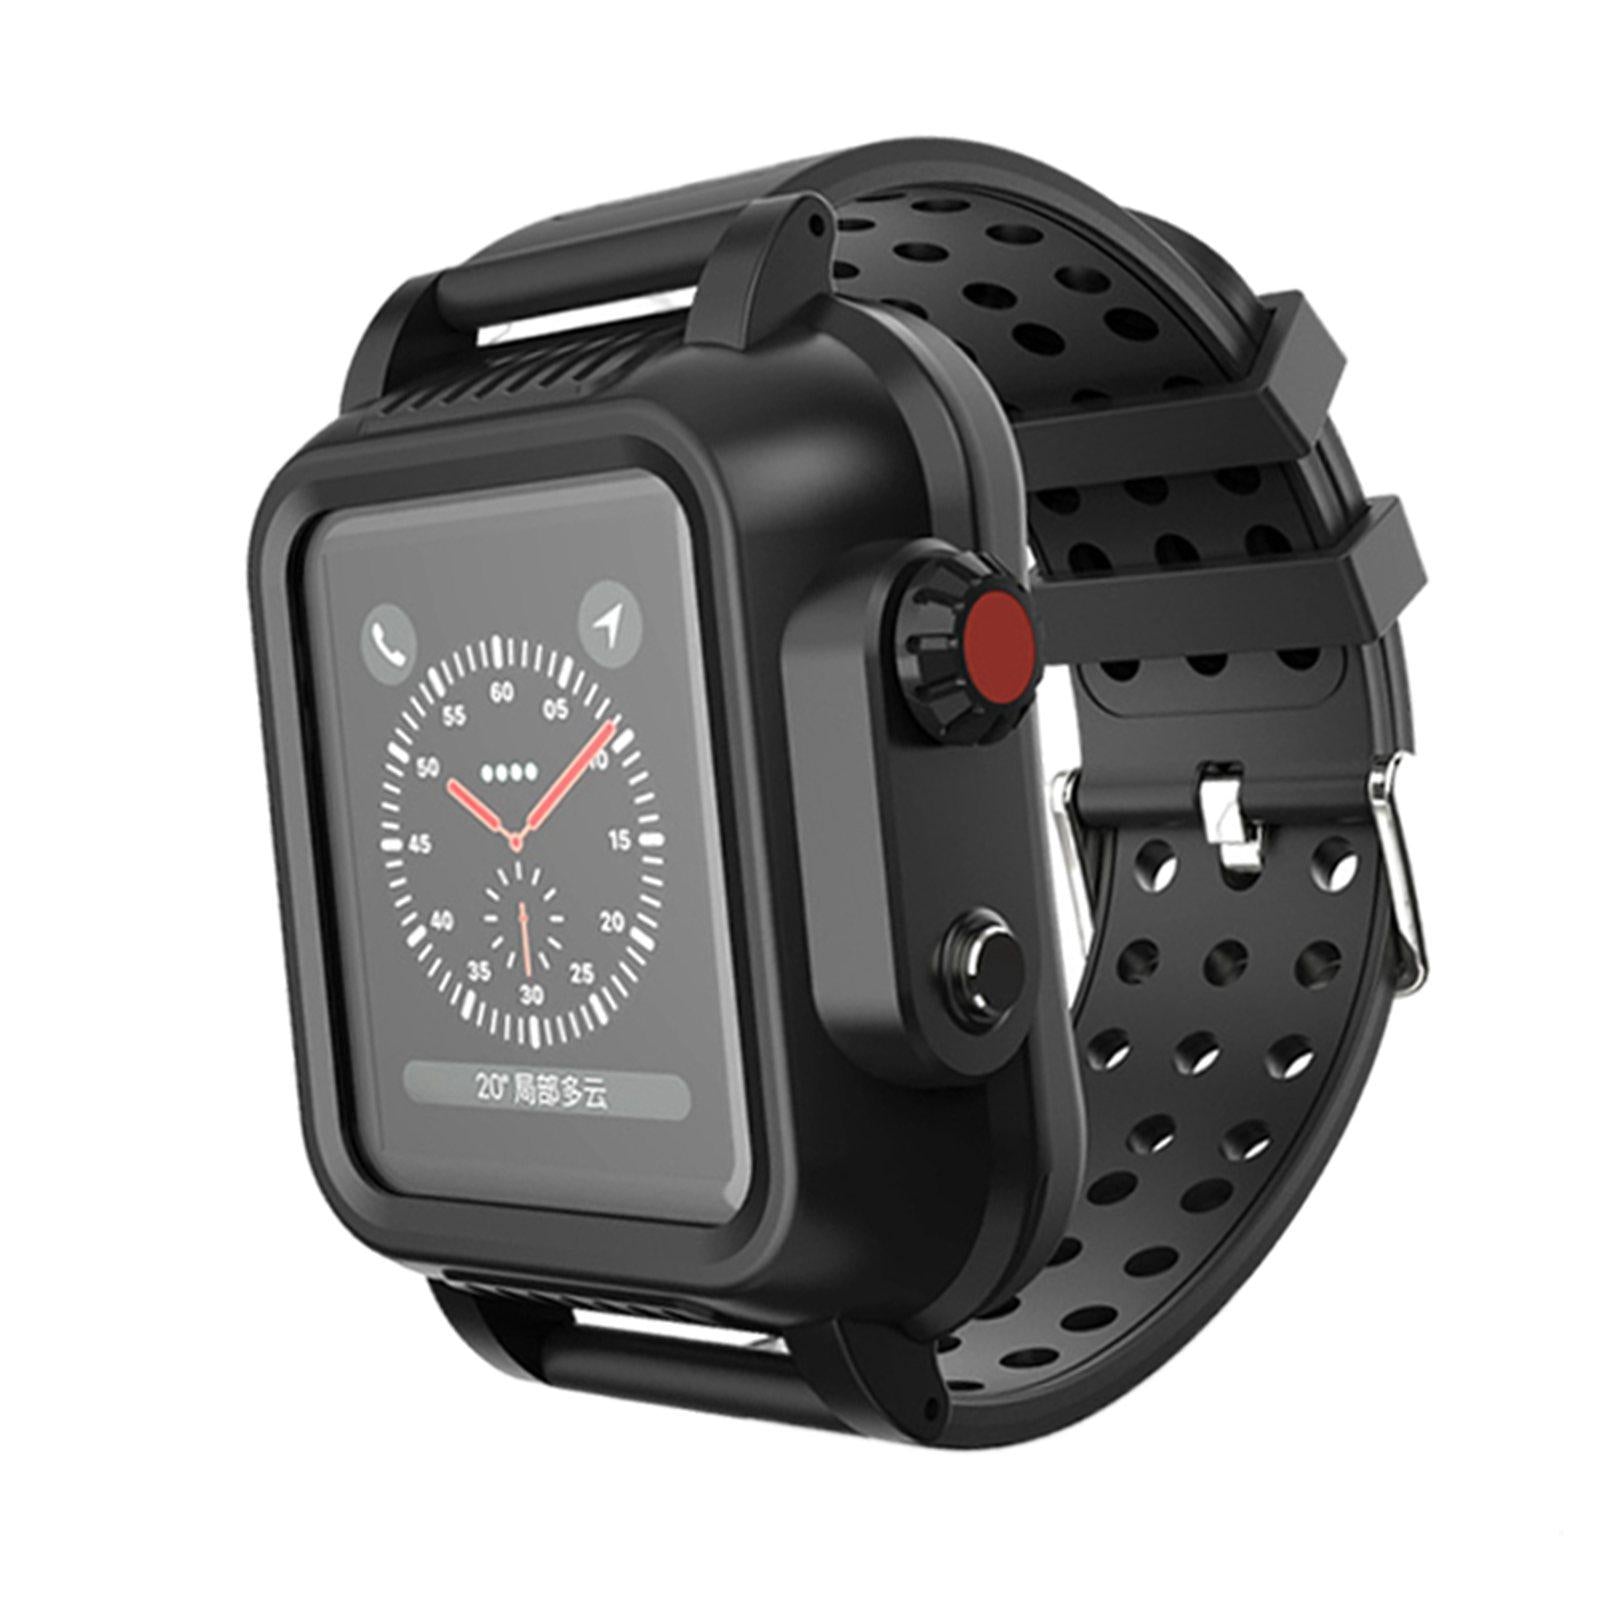 Rugged Protective Case Shockproof Durable for Apple Watch 3rd 4th Generation strap width  44mm